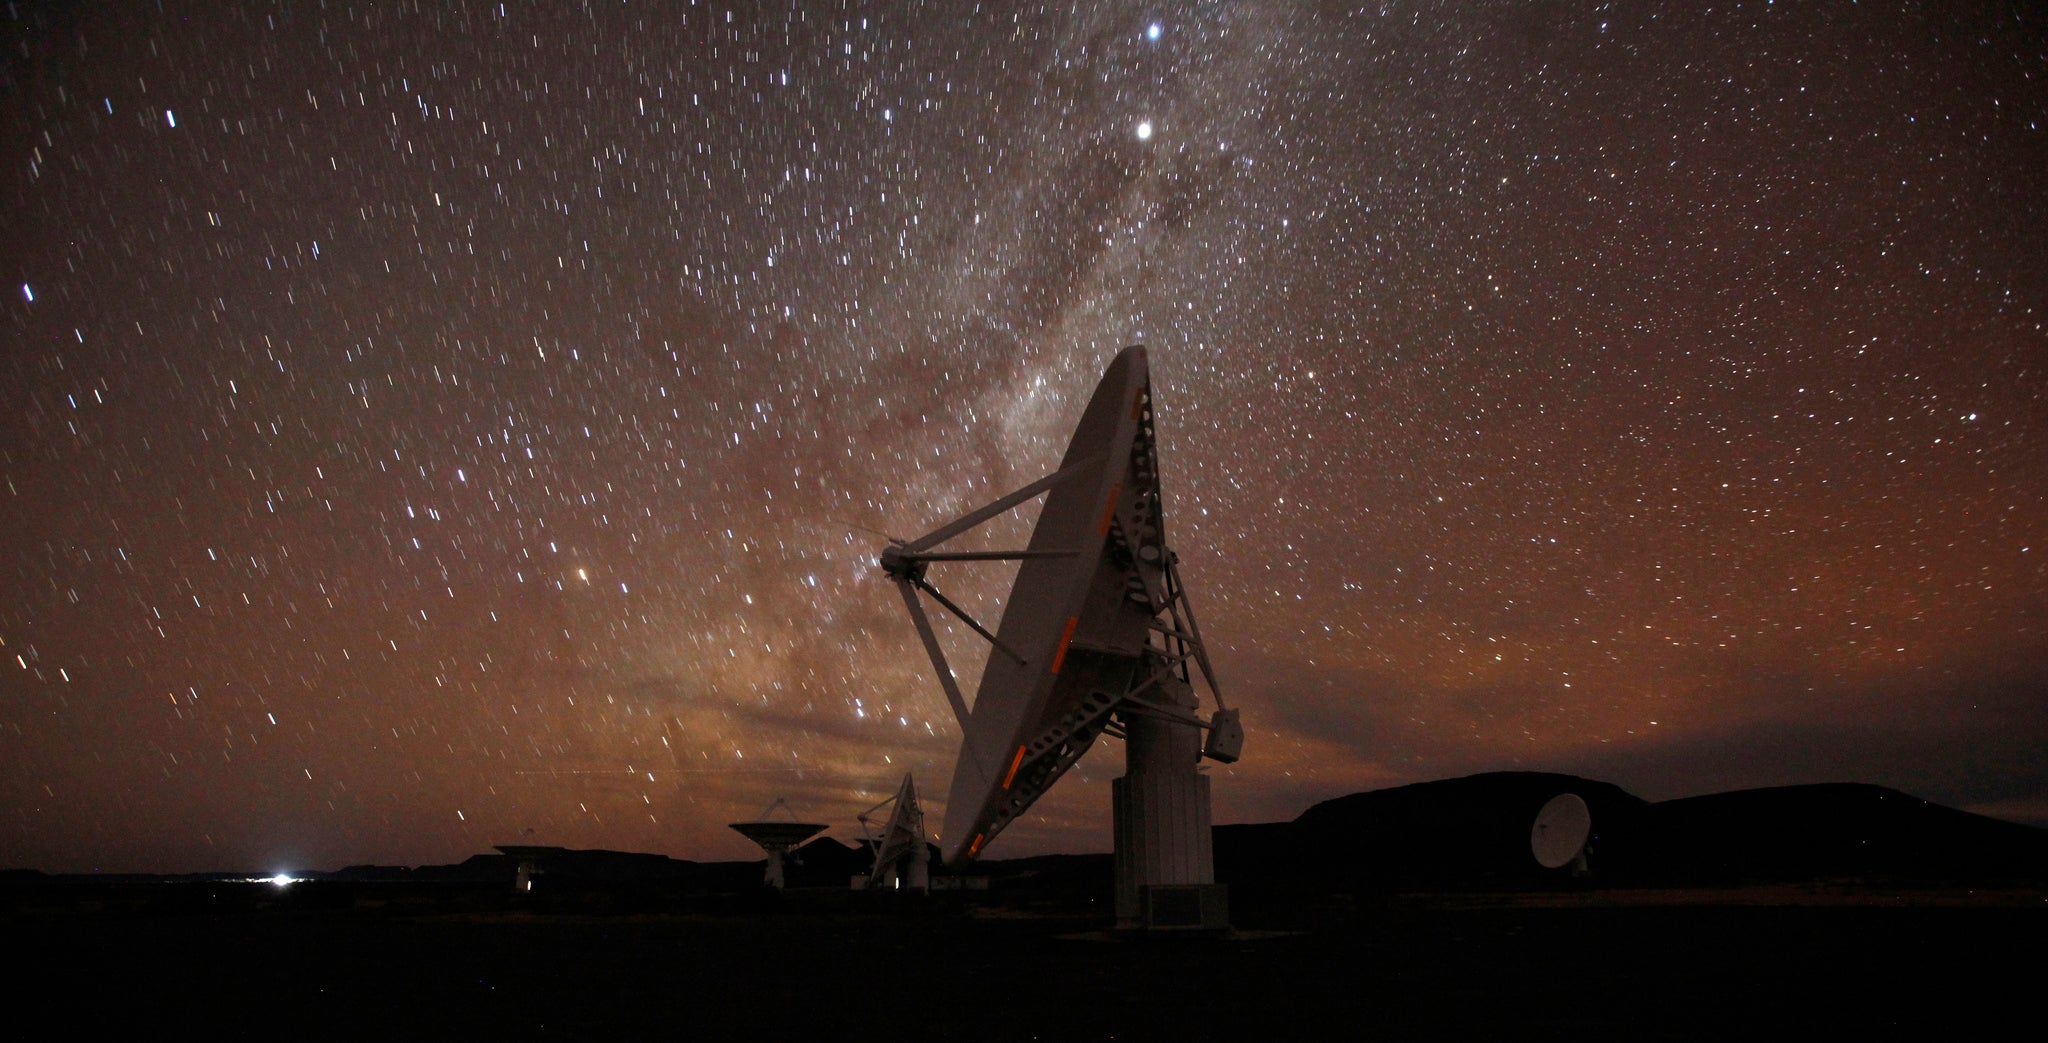 Night falls over radio telescope dishes of the KAT-7 Array at the proposed South African site for the Square Kilometre Array (SKA) telescope